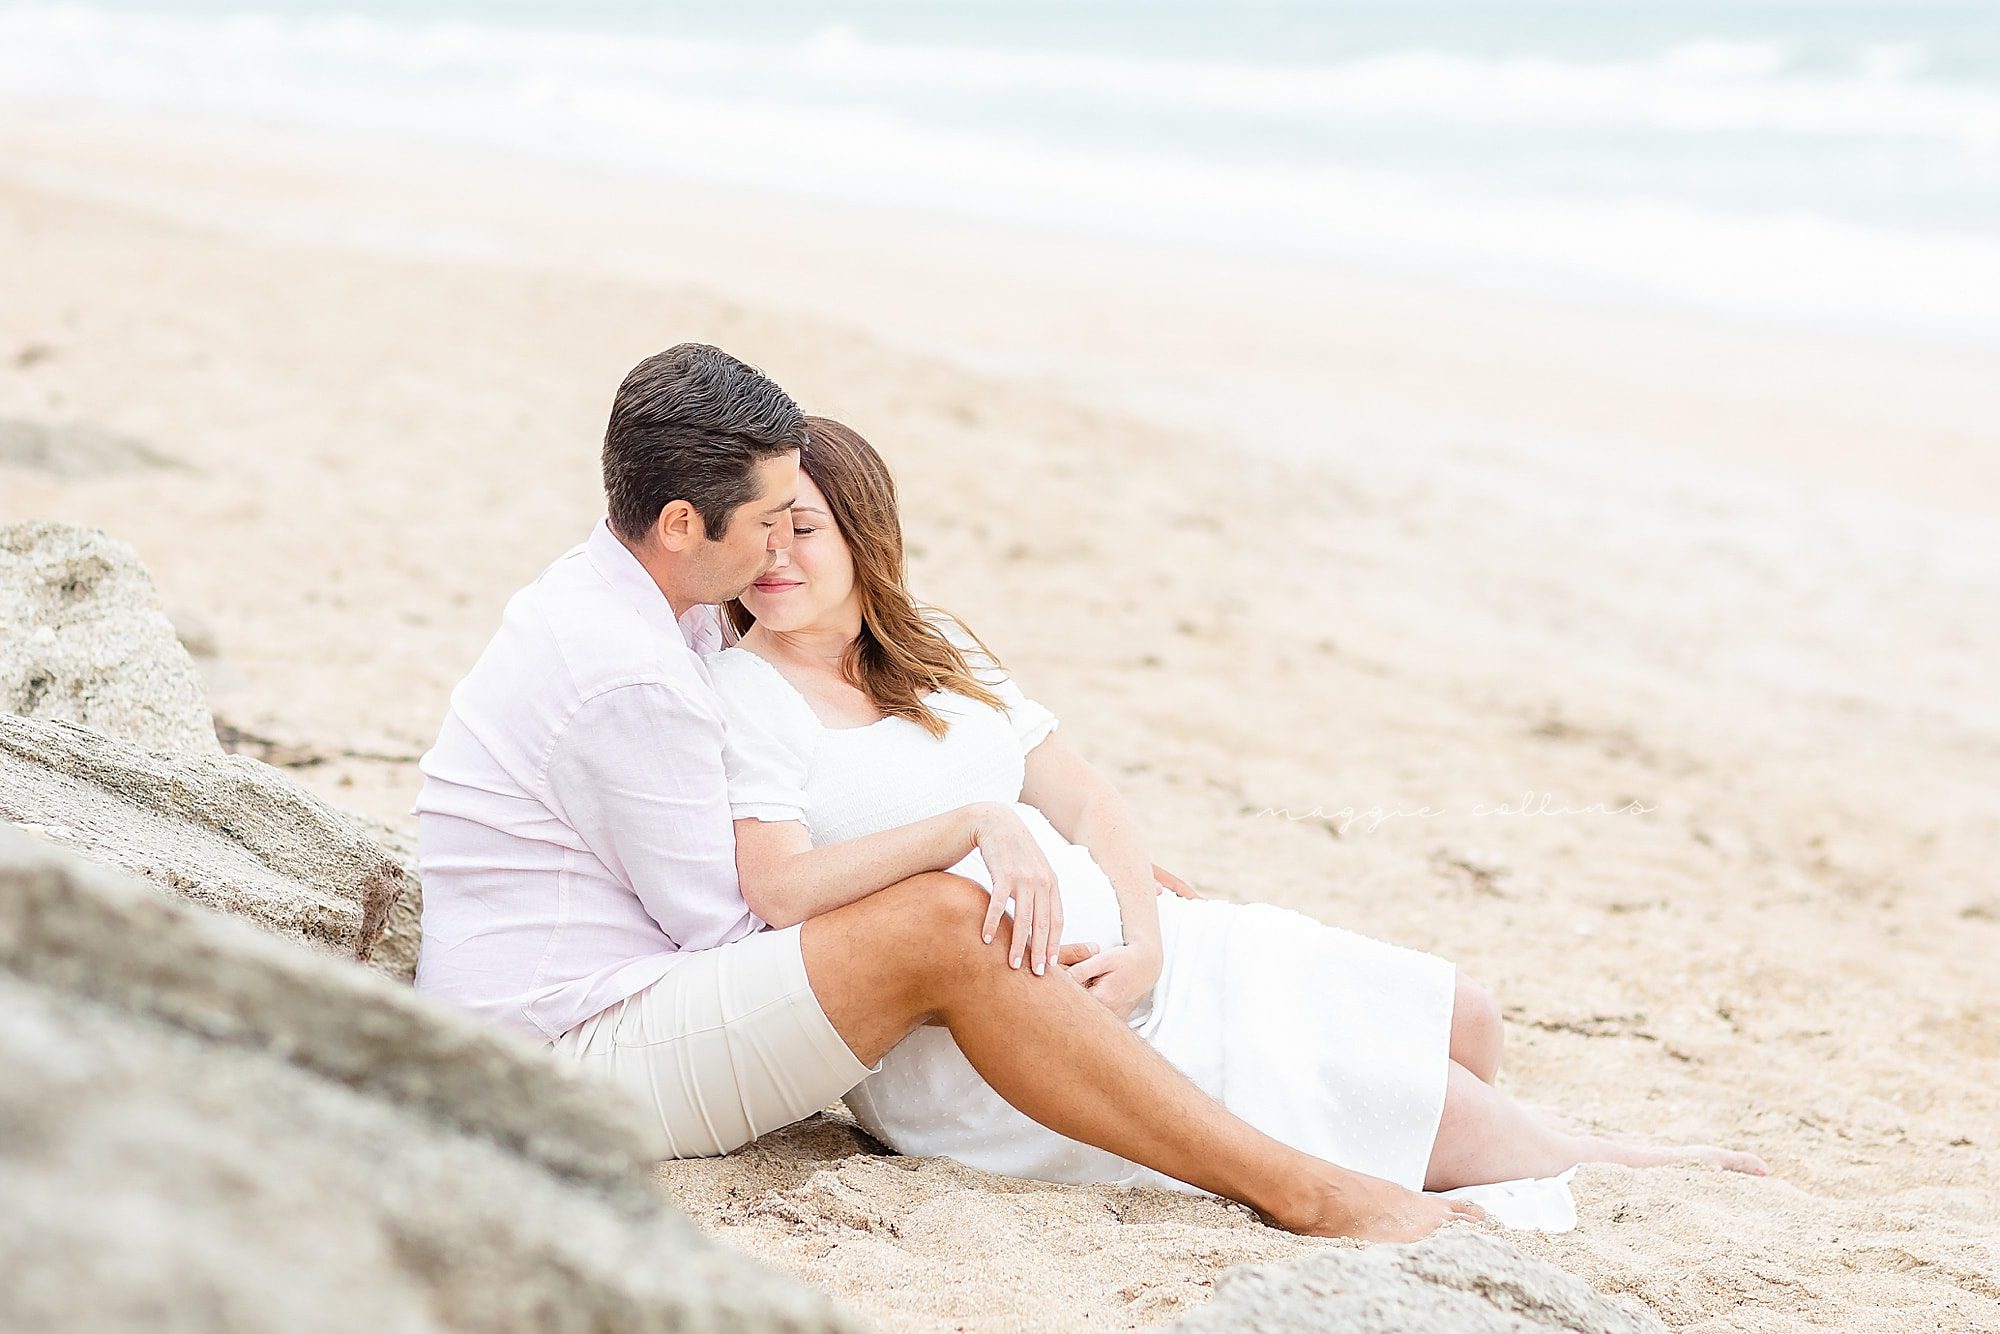 Maternity couples snuggled up on the beach sand.